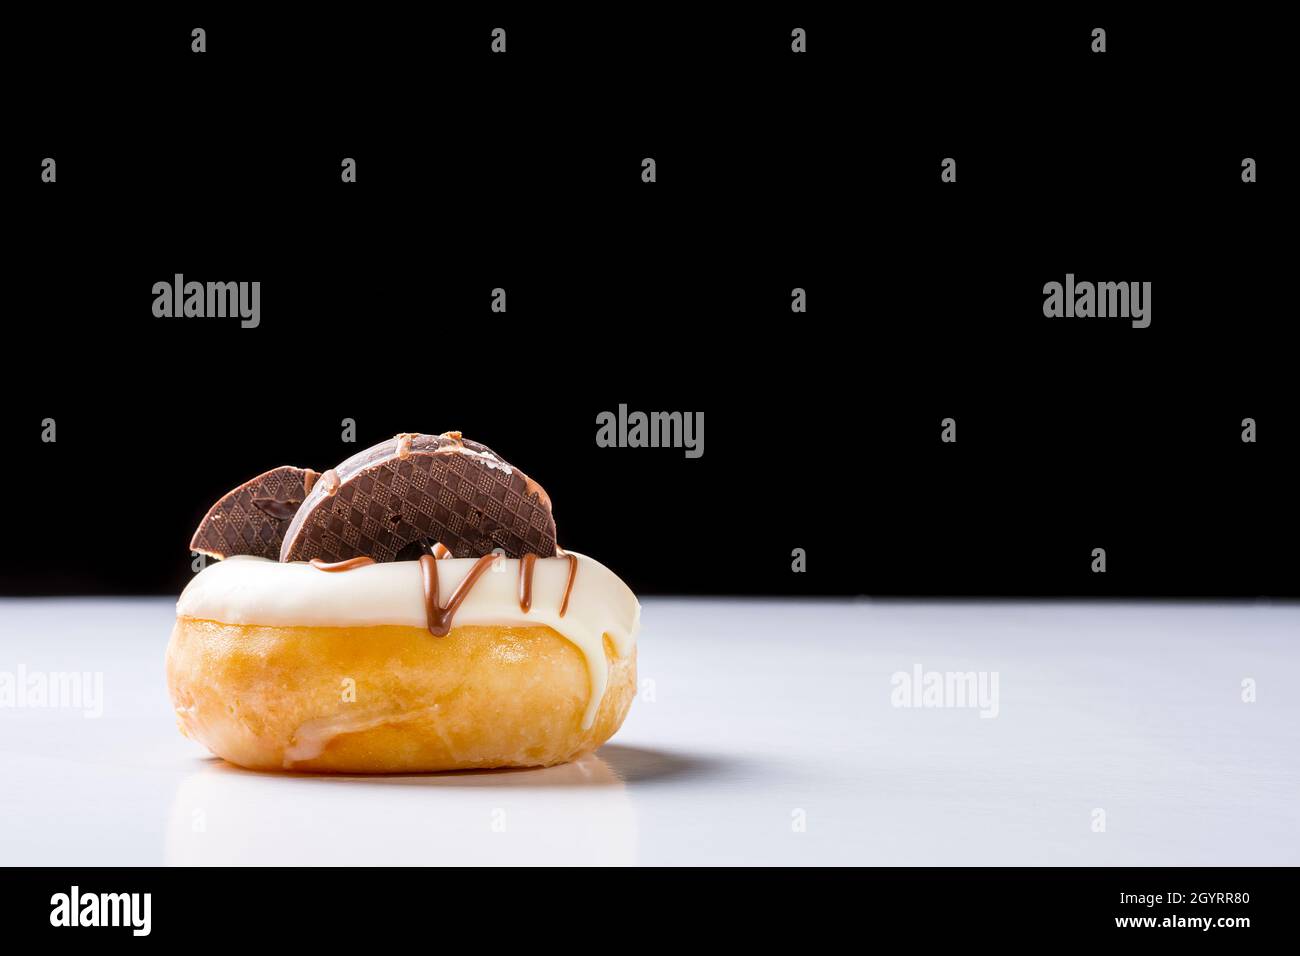 Photograph of a white chocolate donuts with dark chocolate cookies on a white table and a black background.The photo is taken in horizontal format and Stock Photo